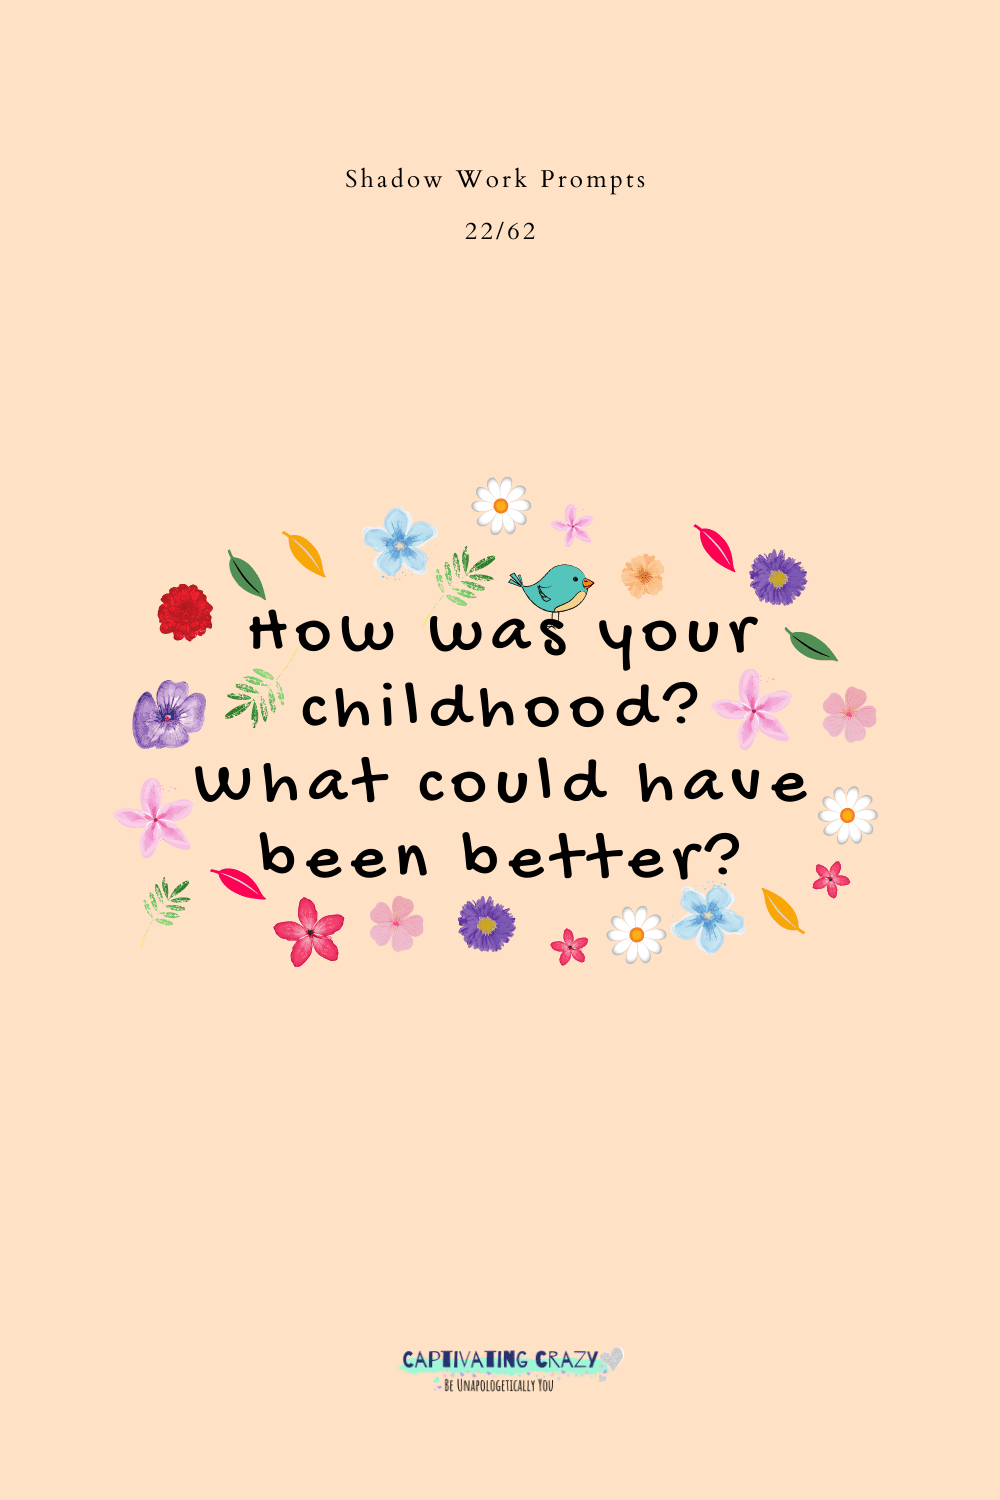 How was your childhood? What could have been better?